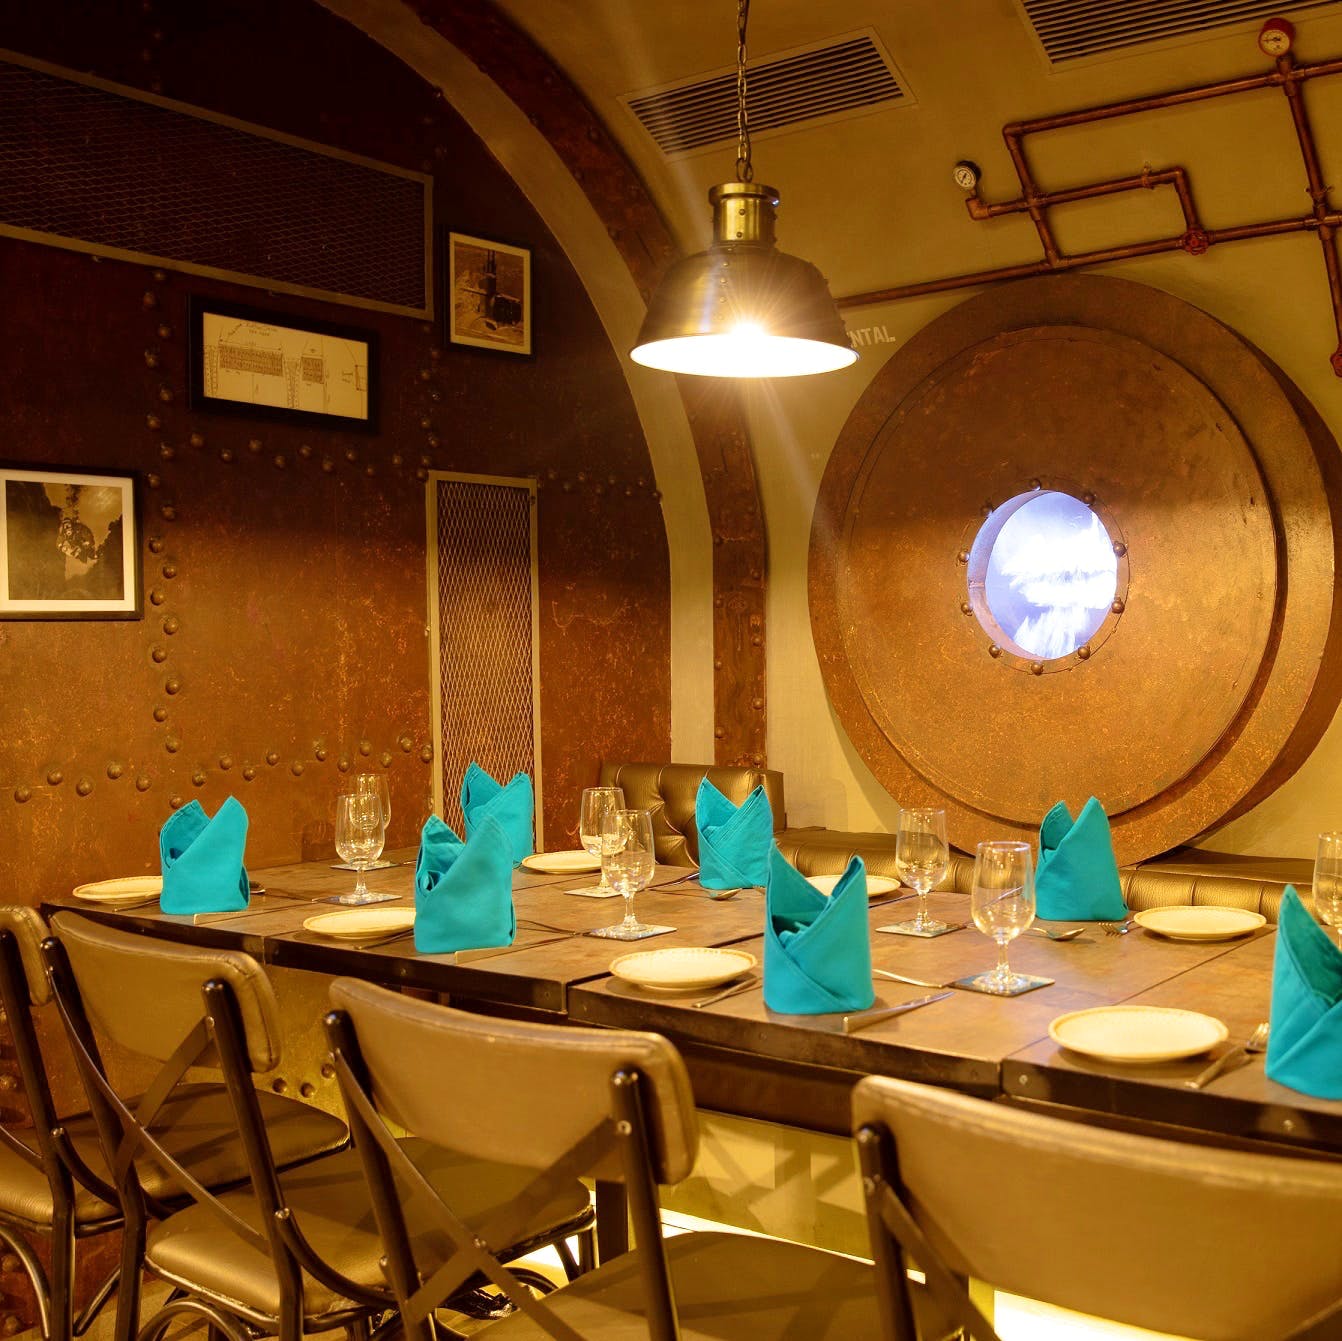 Turquoise,Restaurant,Table,Room,Interior design,Function hall,Building,Dining room